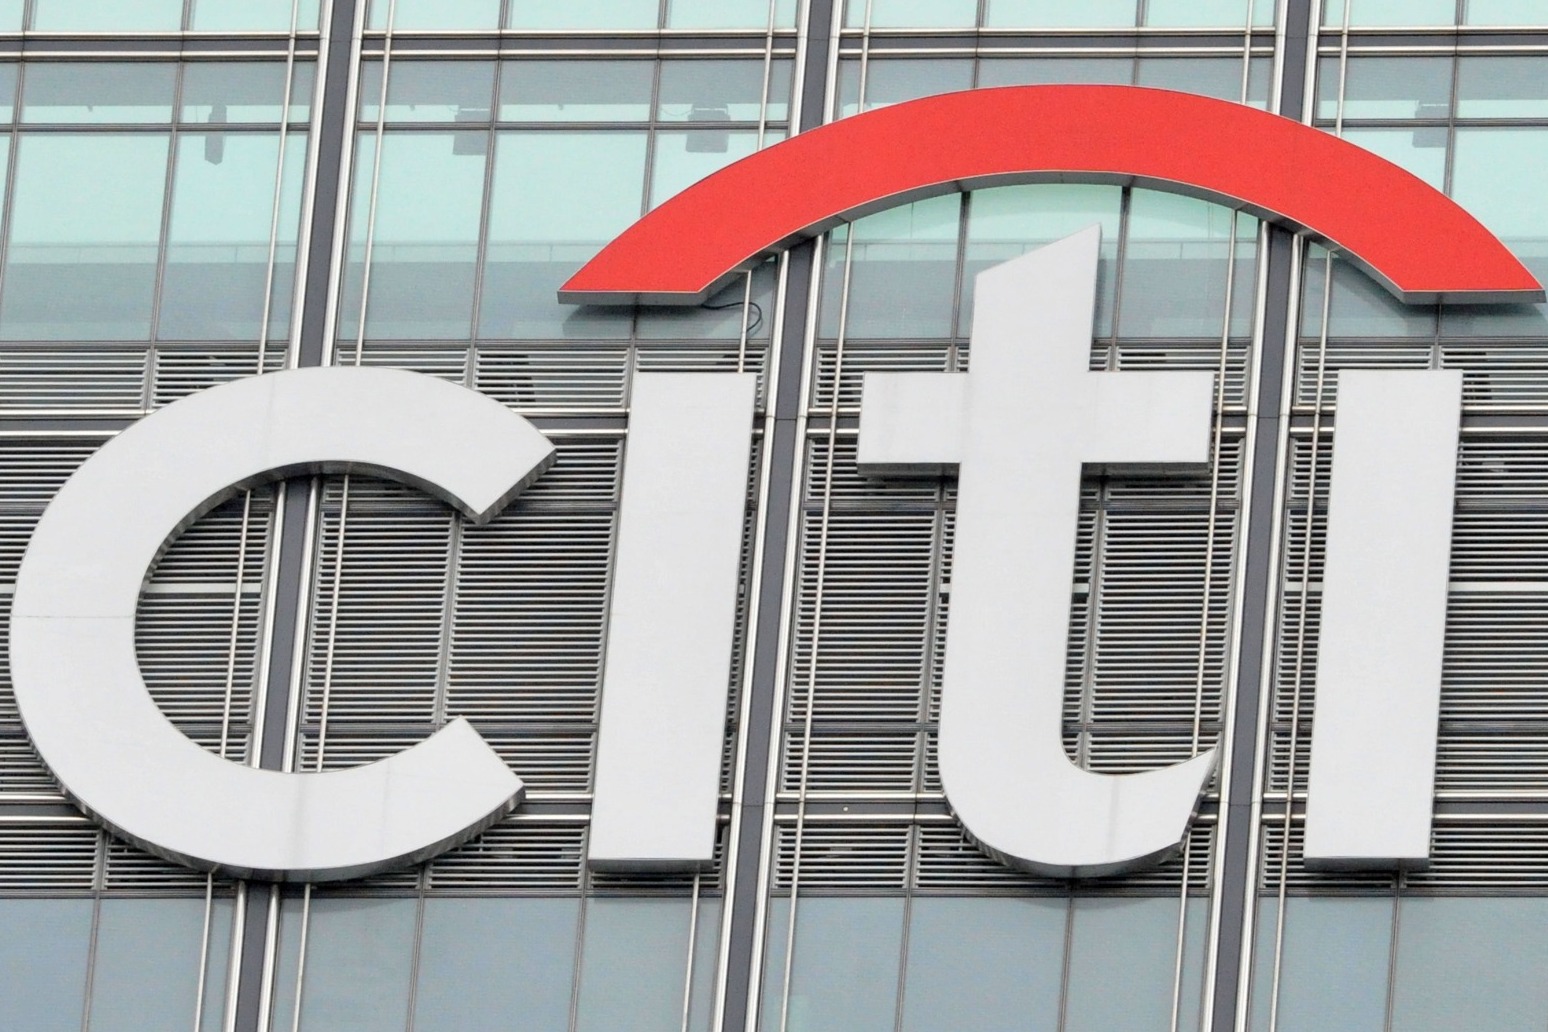 Citi plans to cut about 20,000 jobs as part of global overhaul 